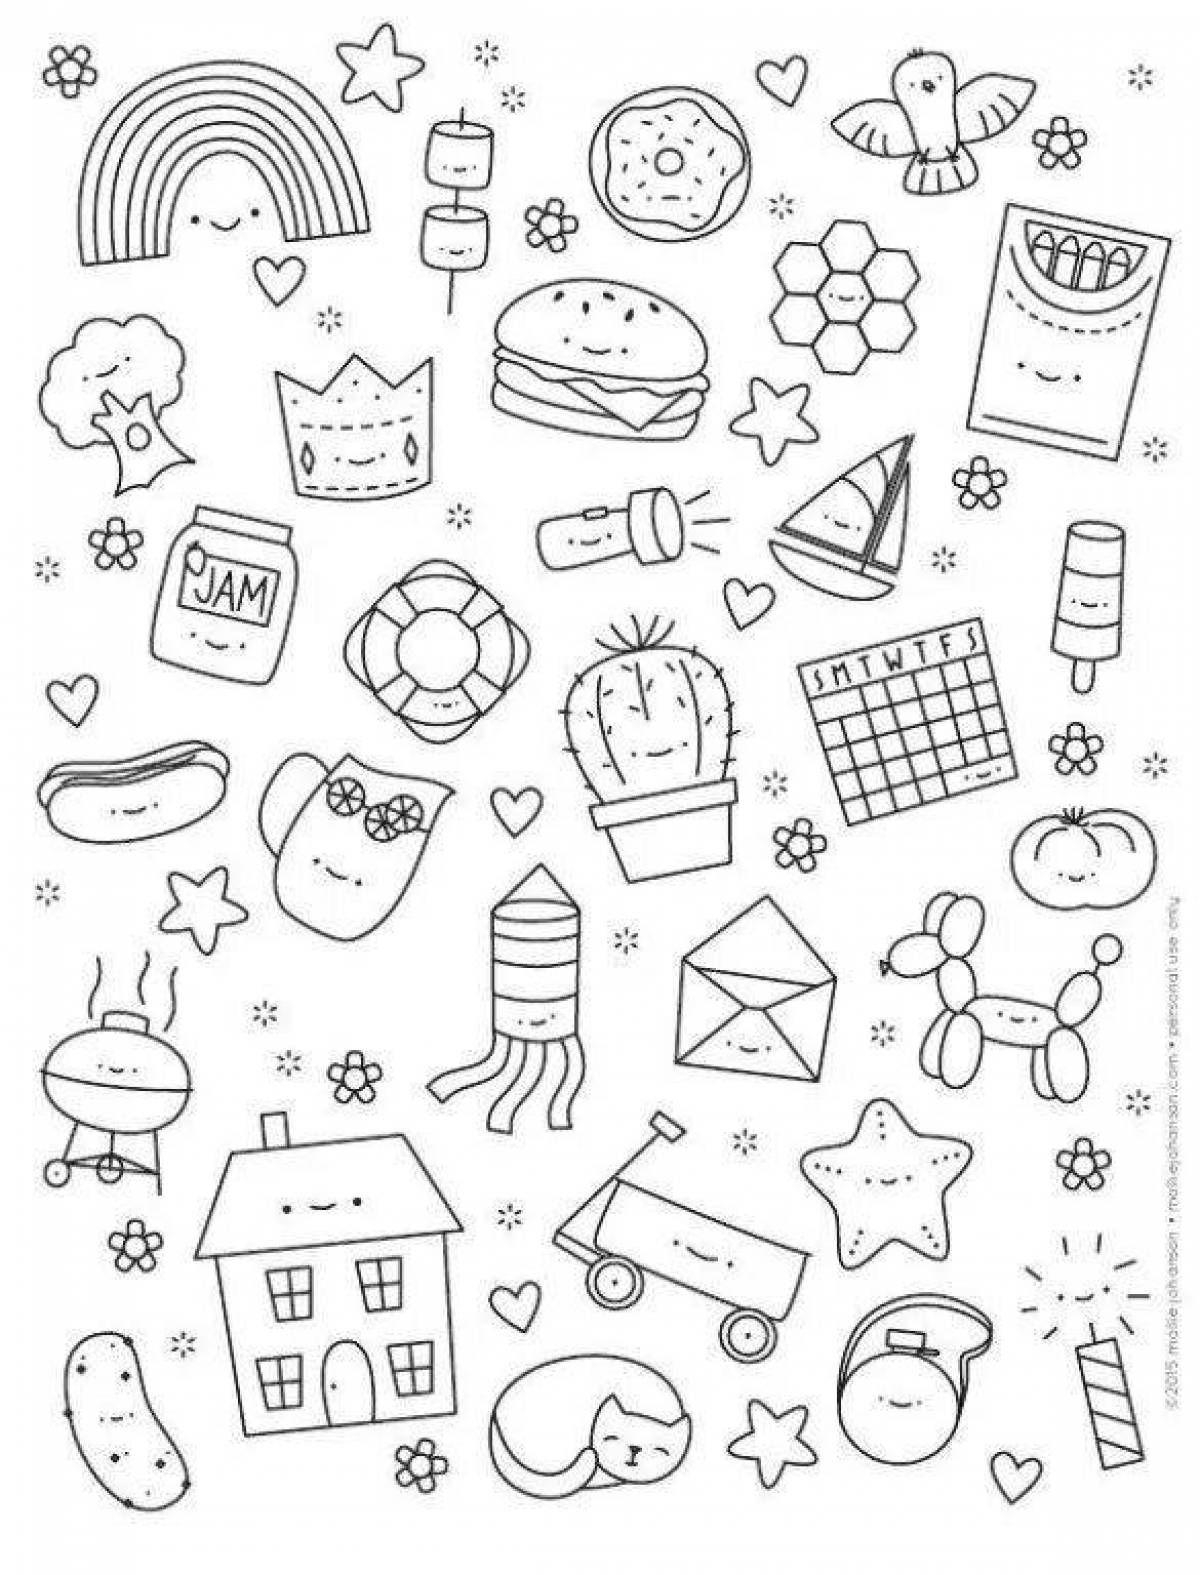 Vibrant printable coloring pages